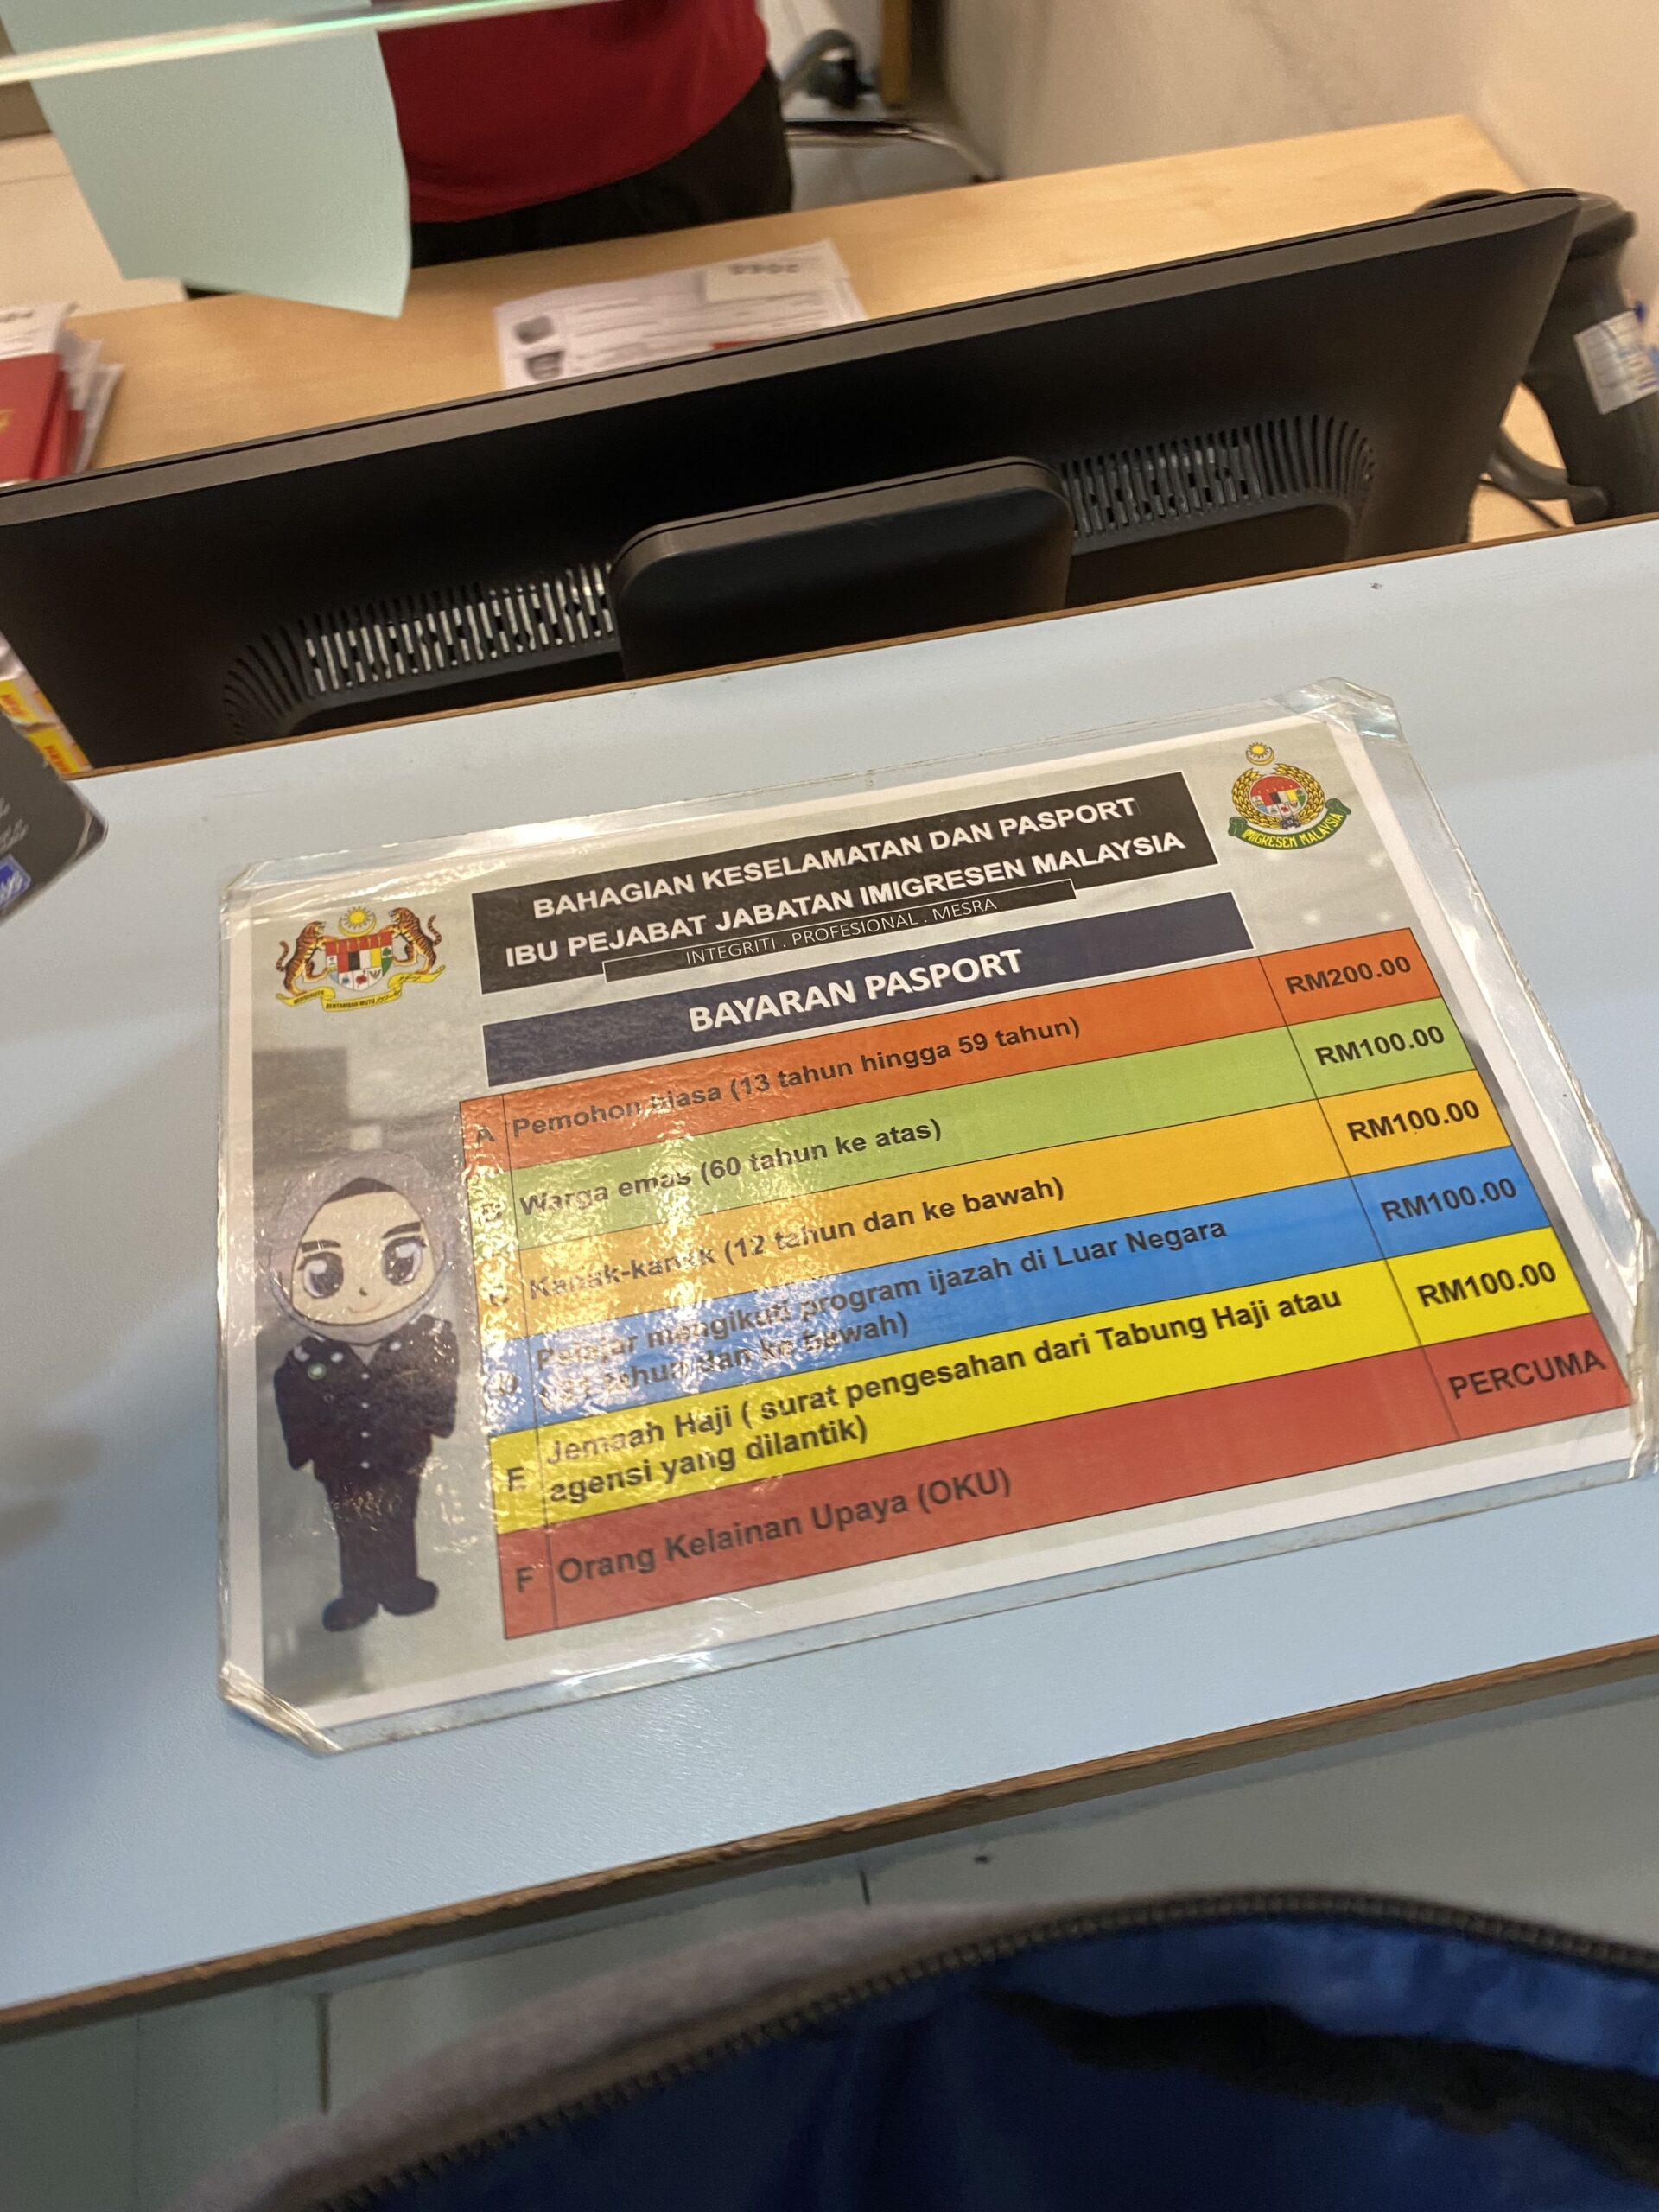 I spent 8 hours getting a new passport at putrajaya office. Here are some tips for first-timers | weirdkaya